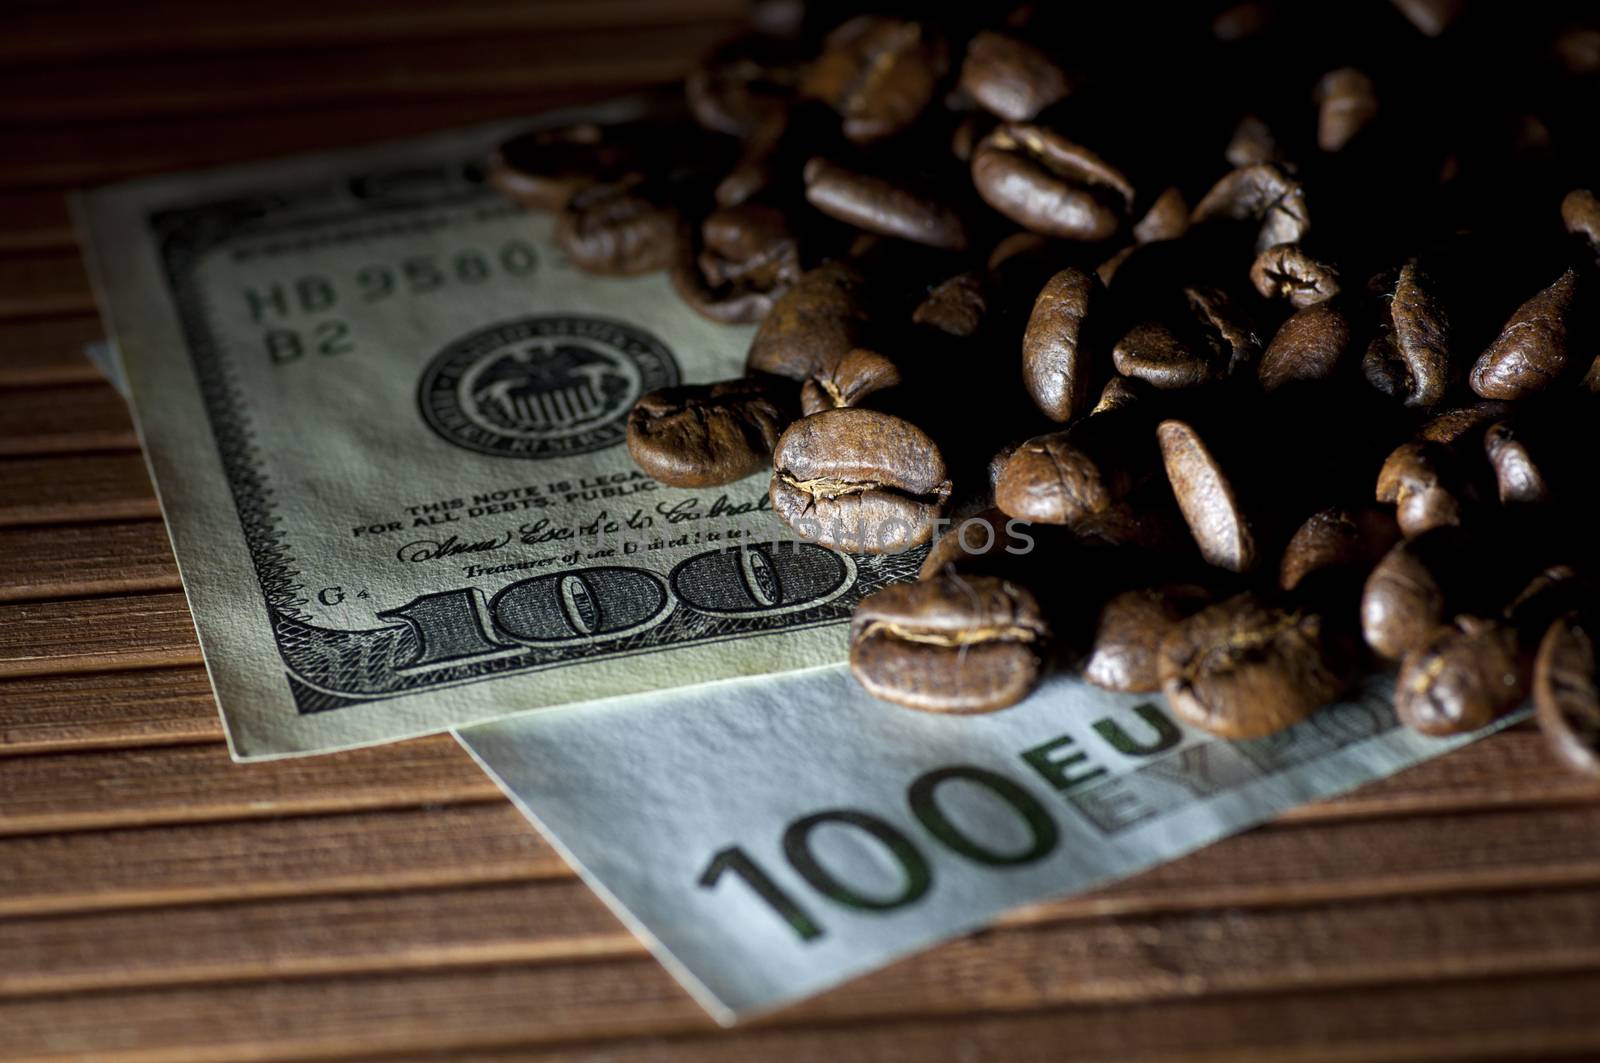 Coffee beans on bank notes (bills) by dred